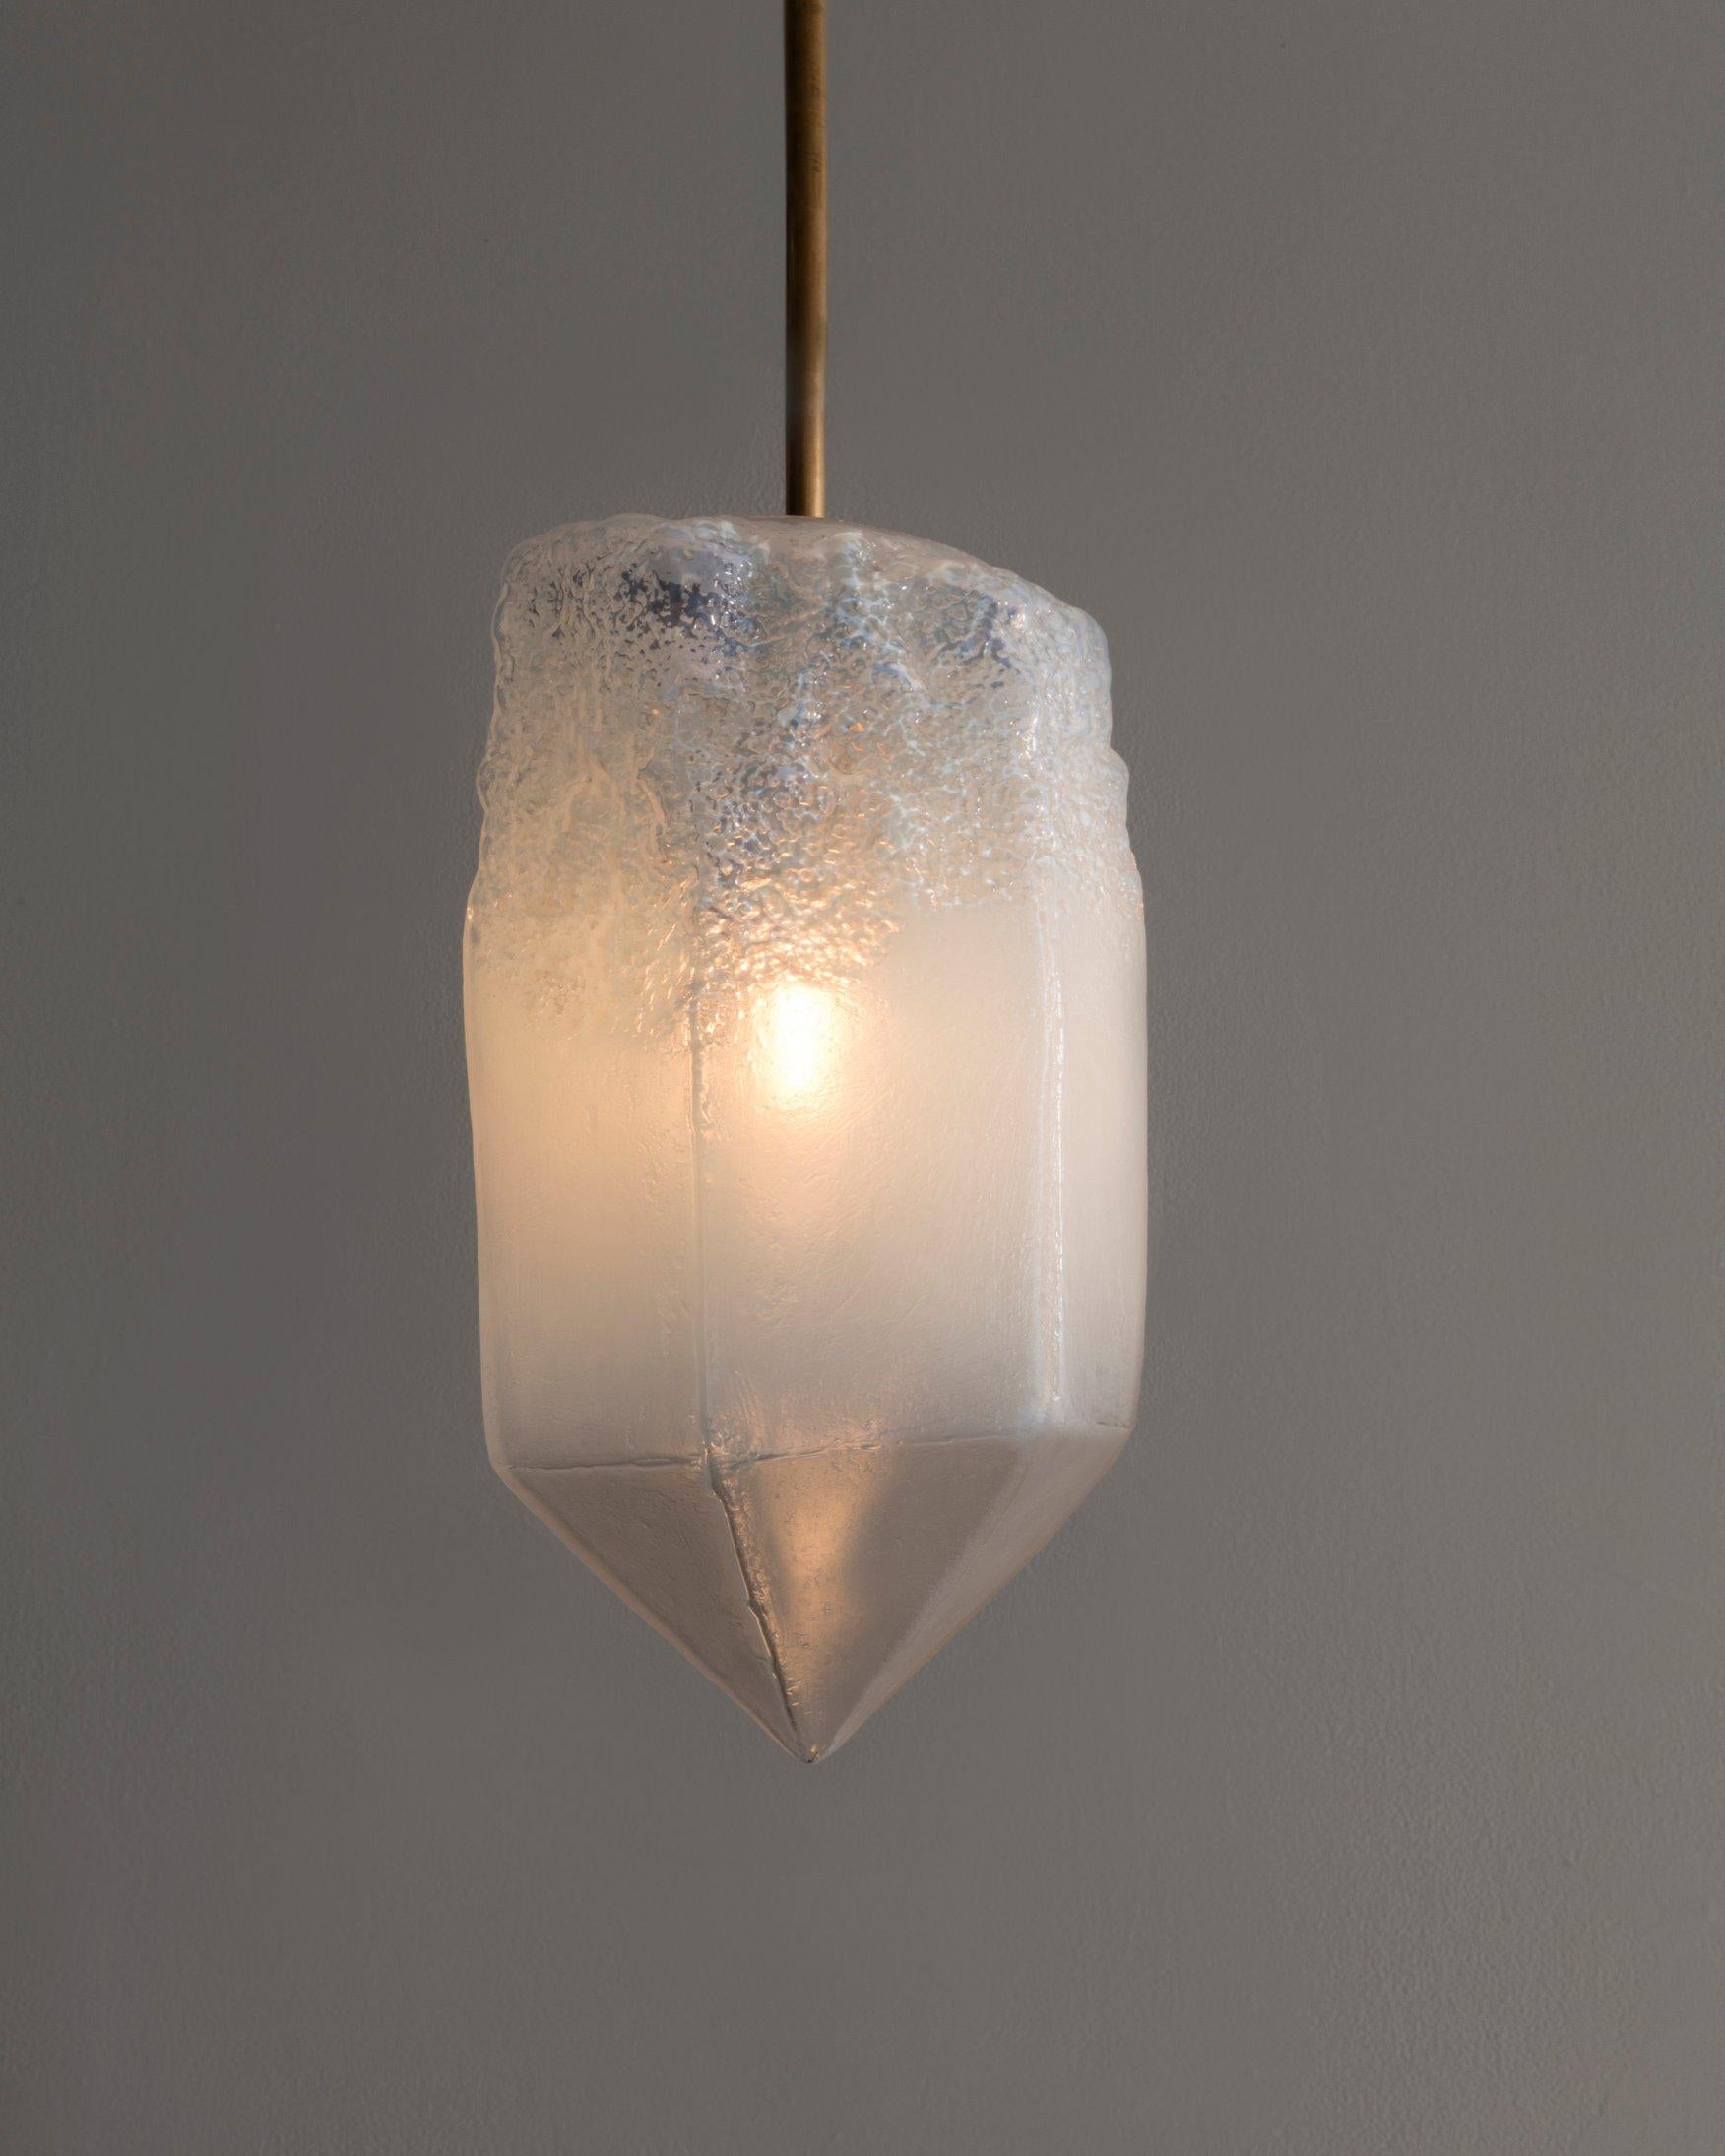 Crystal illuminated sculptural pendant in hand blown translucent white glass. Designed and made by Jeff Zimmerman, USA, 2017.

Limited number available. Please note that each item may differ slightly in color and shape.